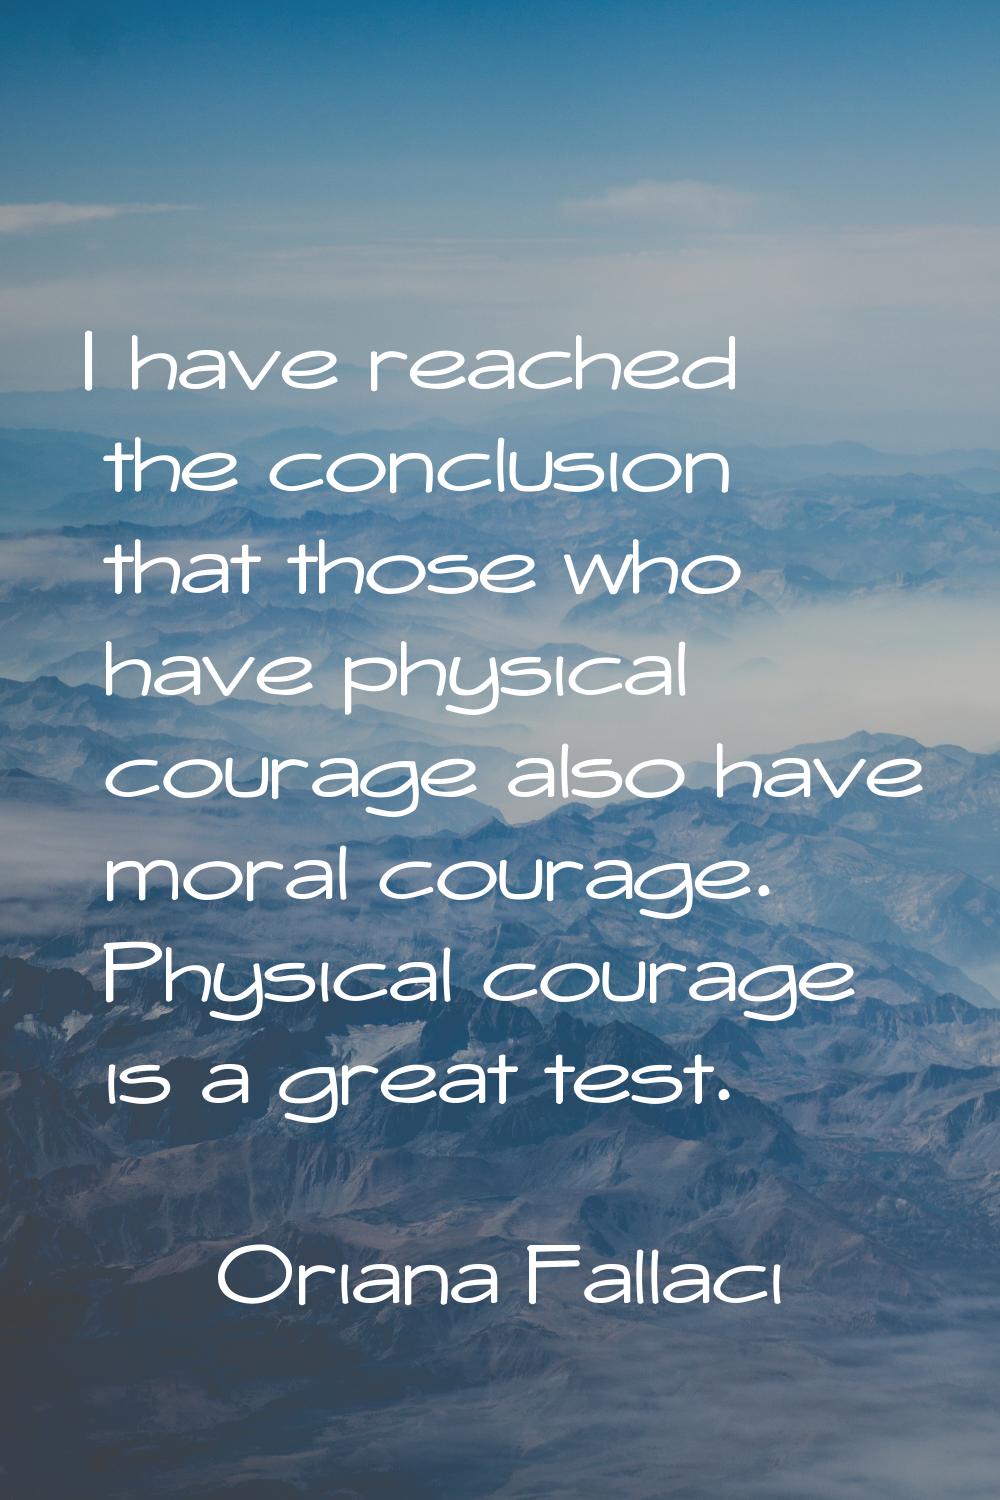 I have reached the conclusion that those who have physical courage also have moral courage. Physica